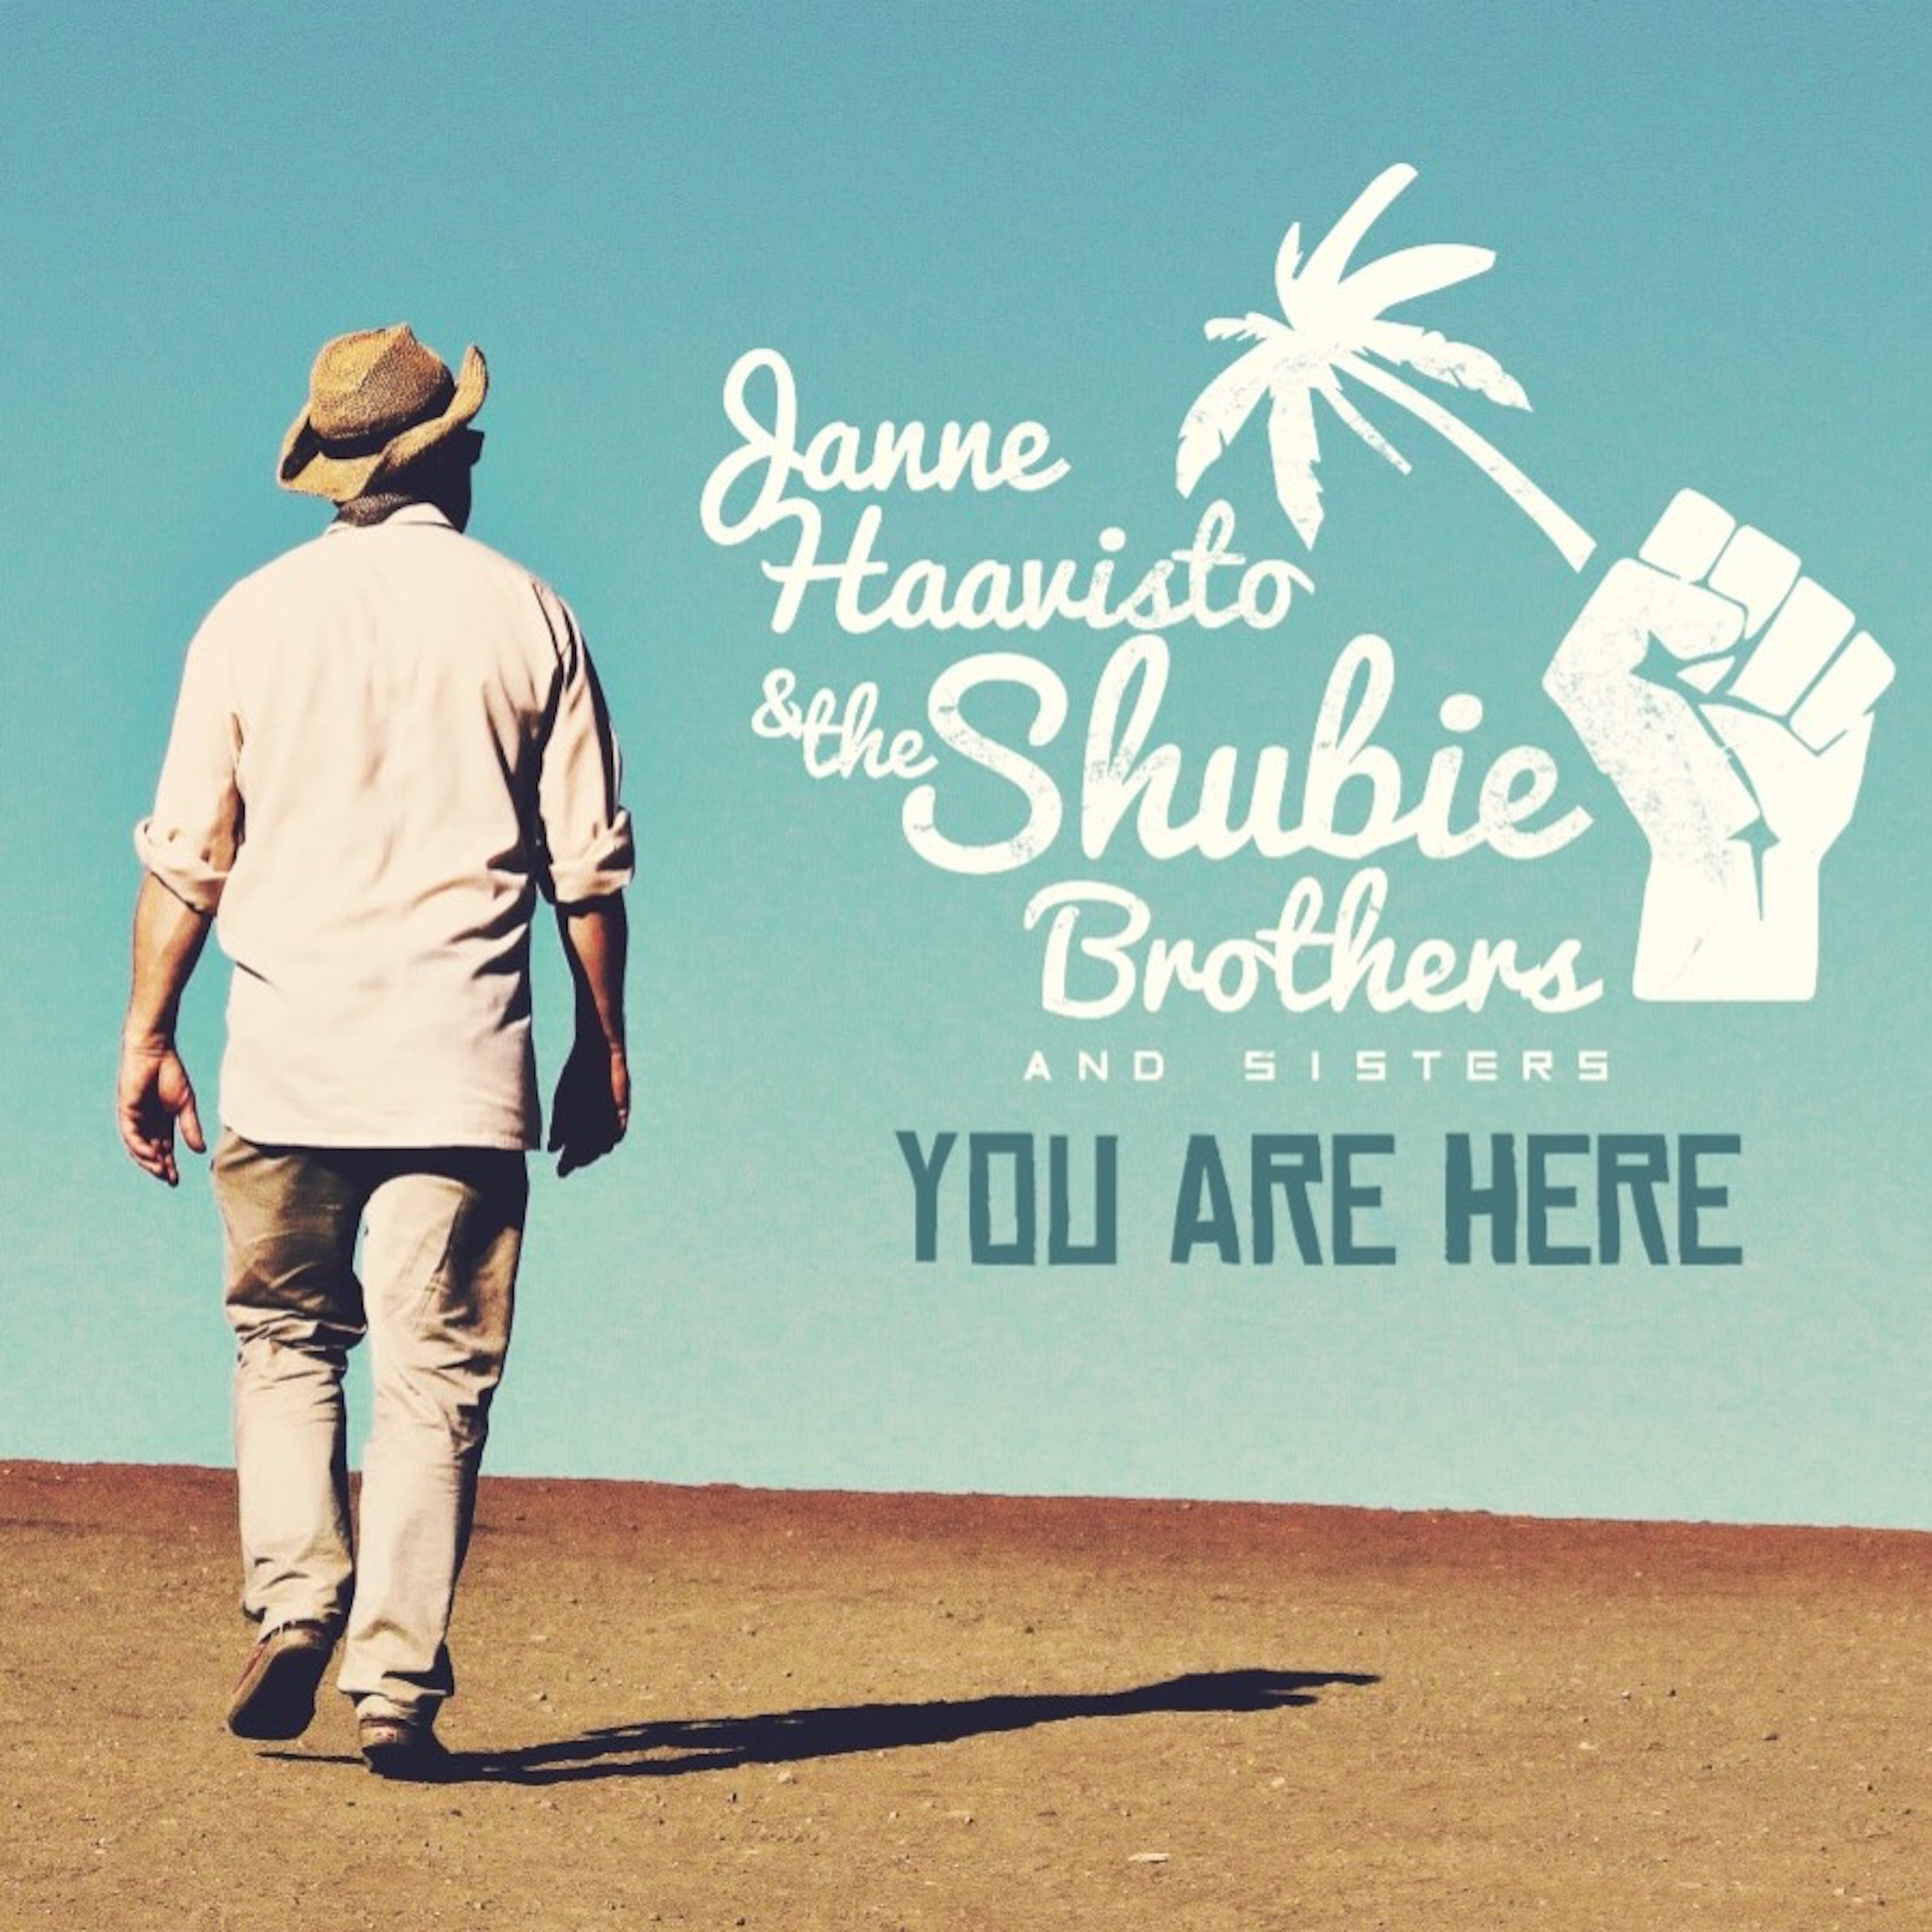 Janne Haavisto & The Shubie Brothers and Sisters - You Are Here